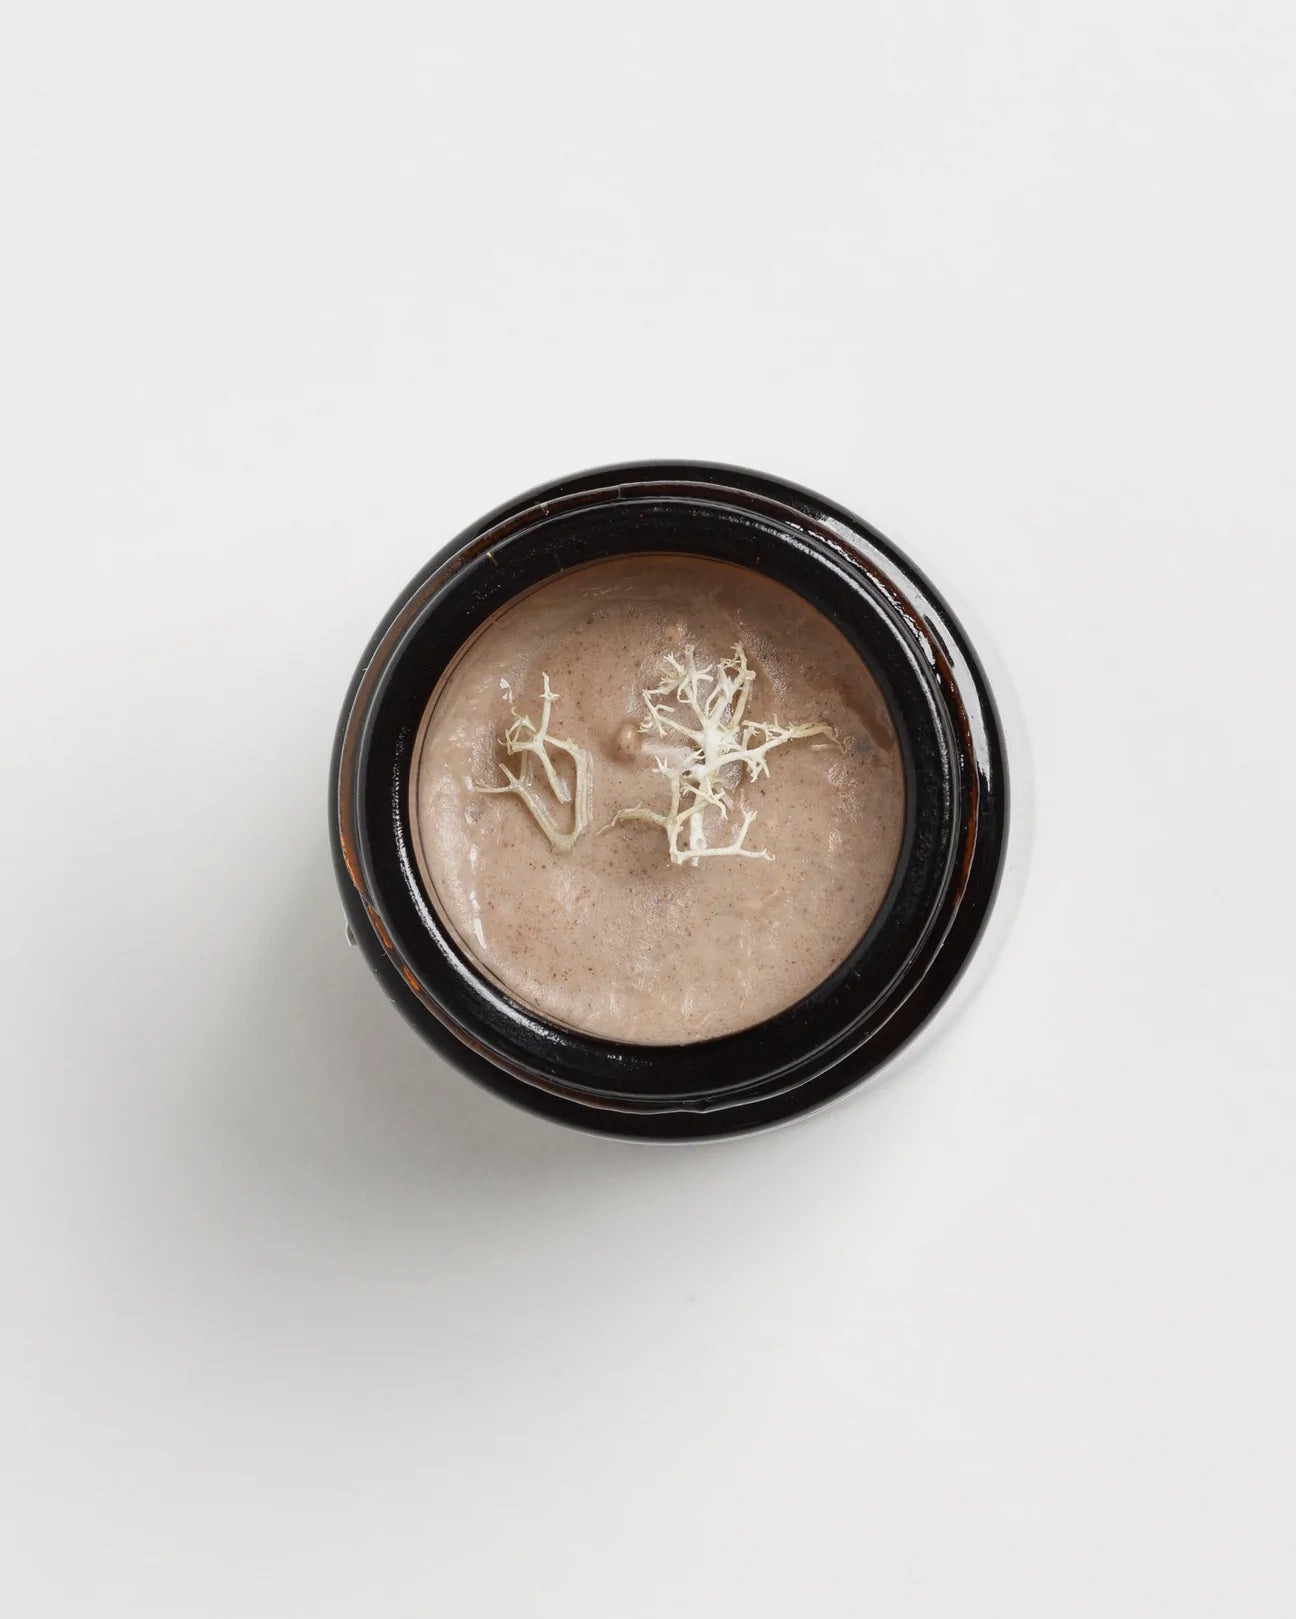 Deeply purifying lichen and clay mask for oily or combination skin impurities